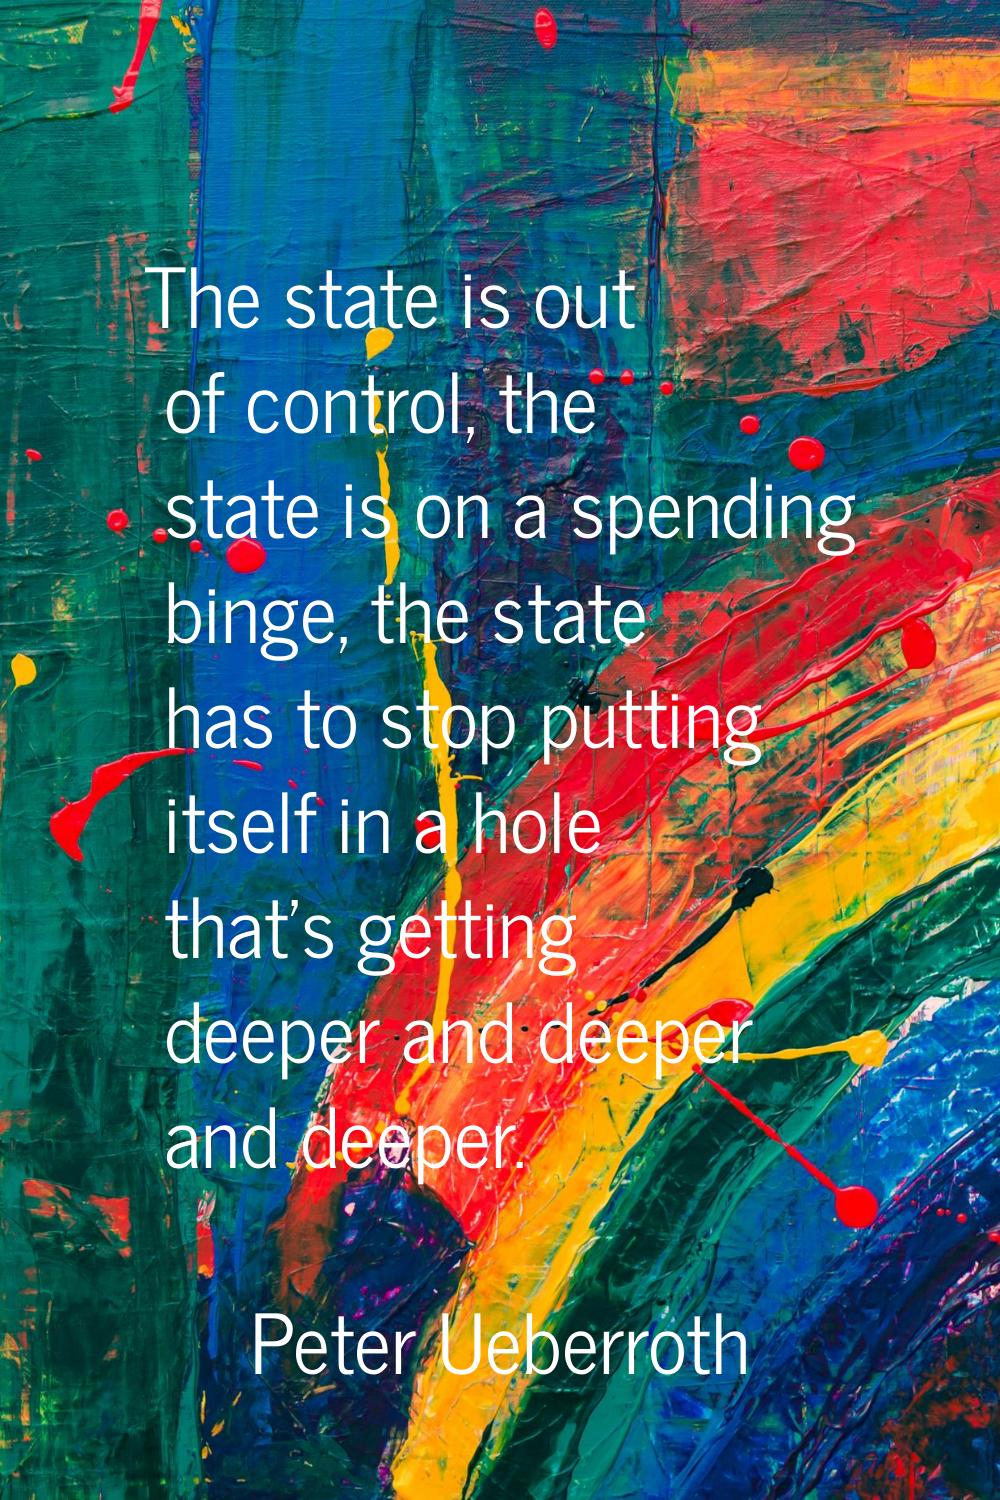 The state is out of control, the state is on a spending binge, the state has to stop putting itself